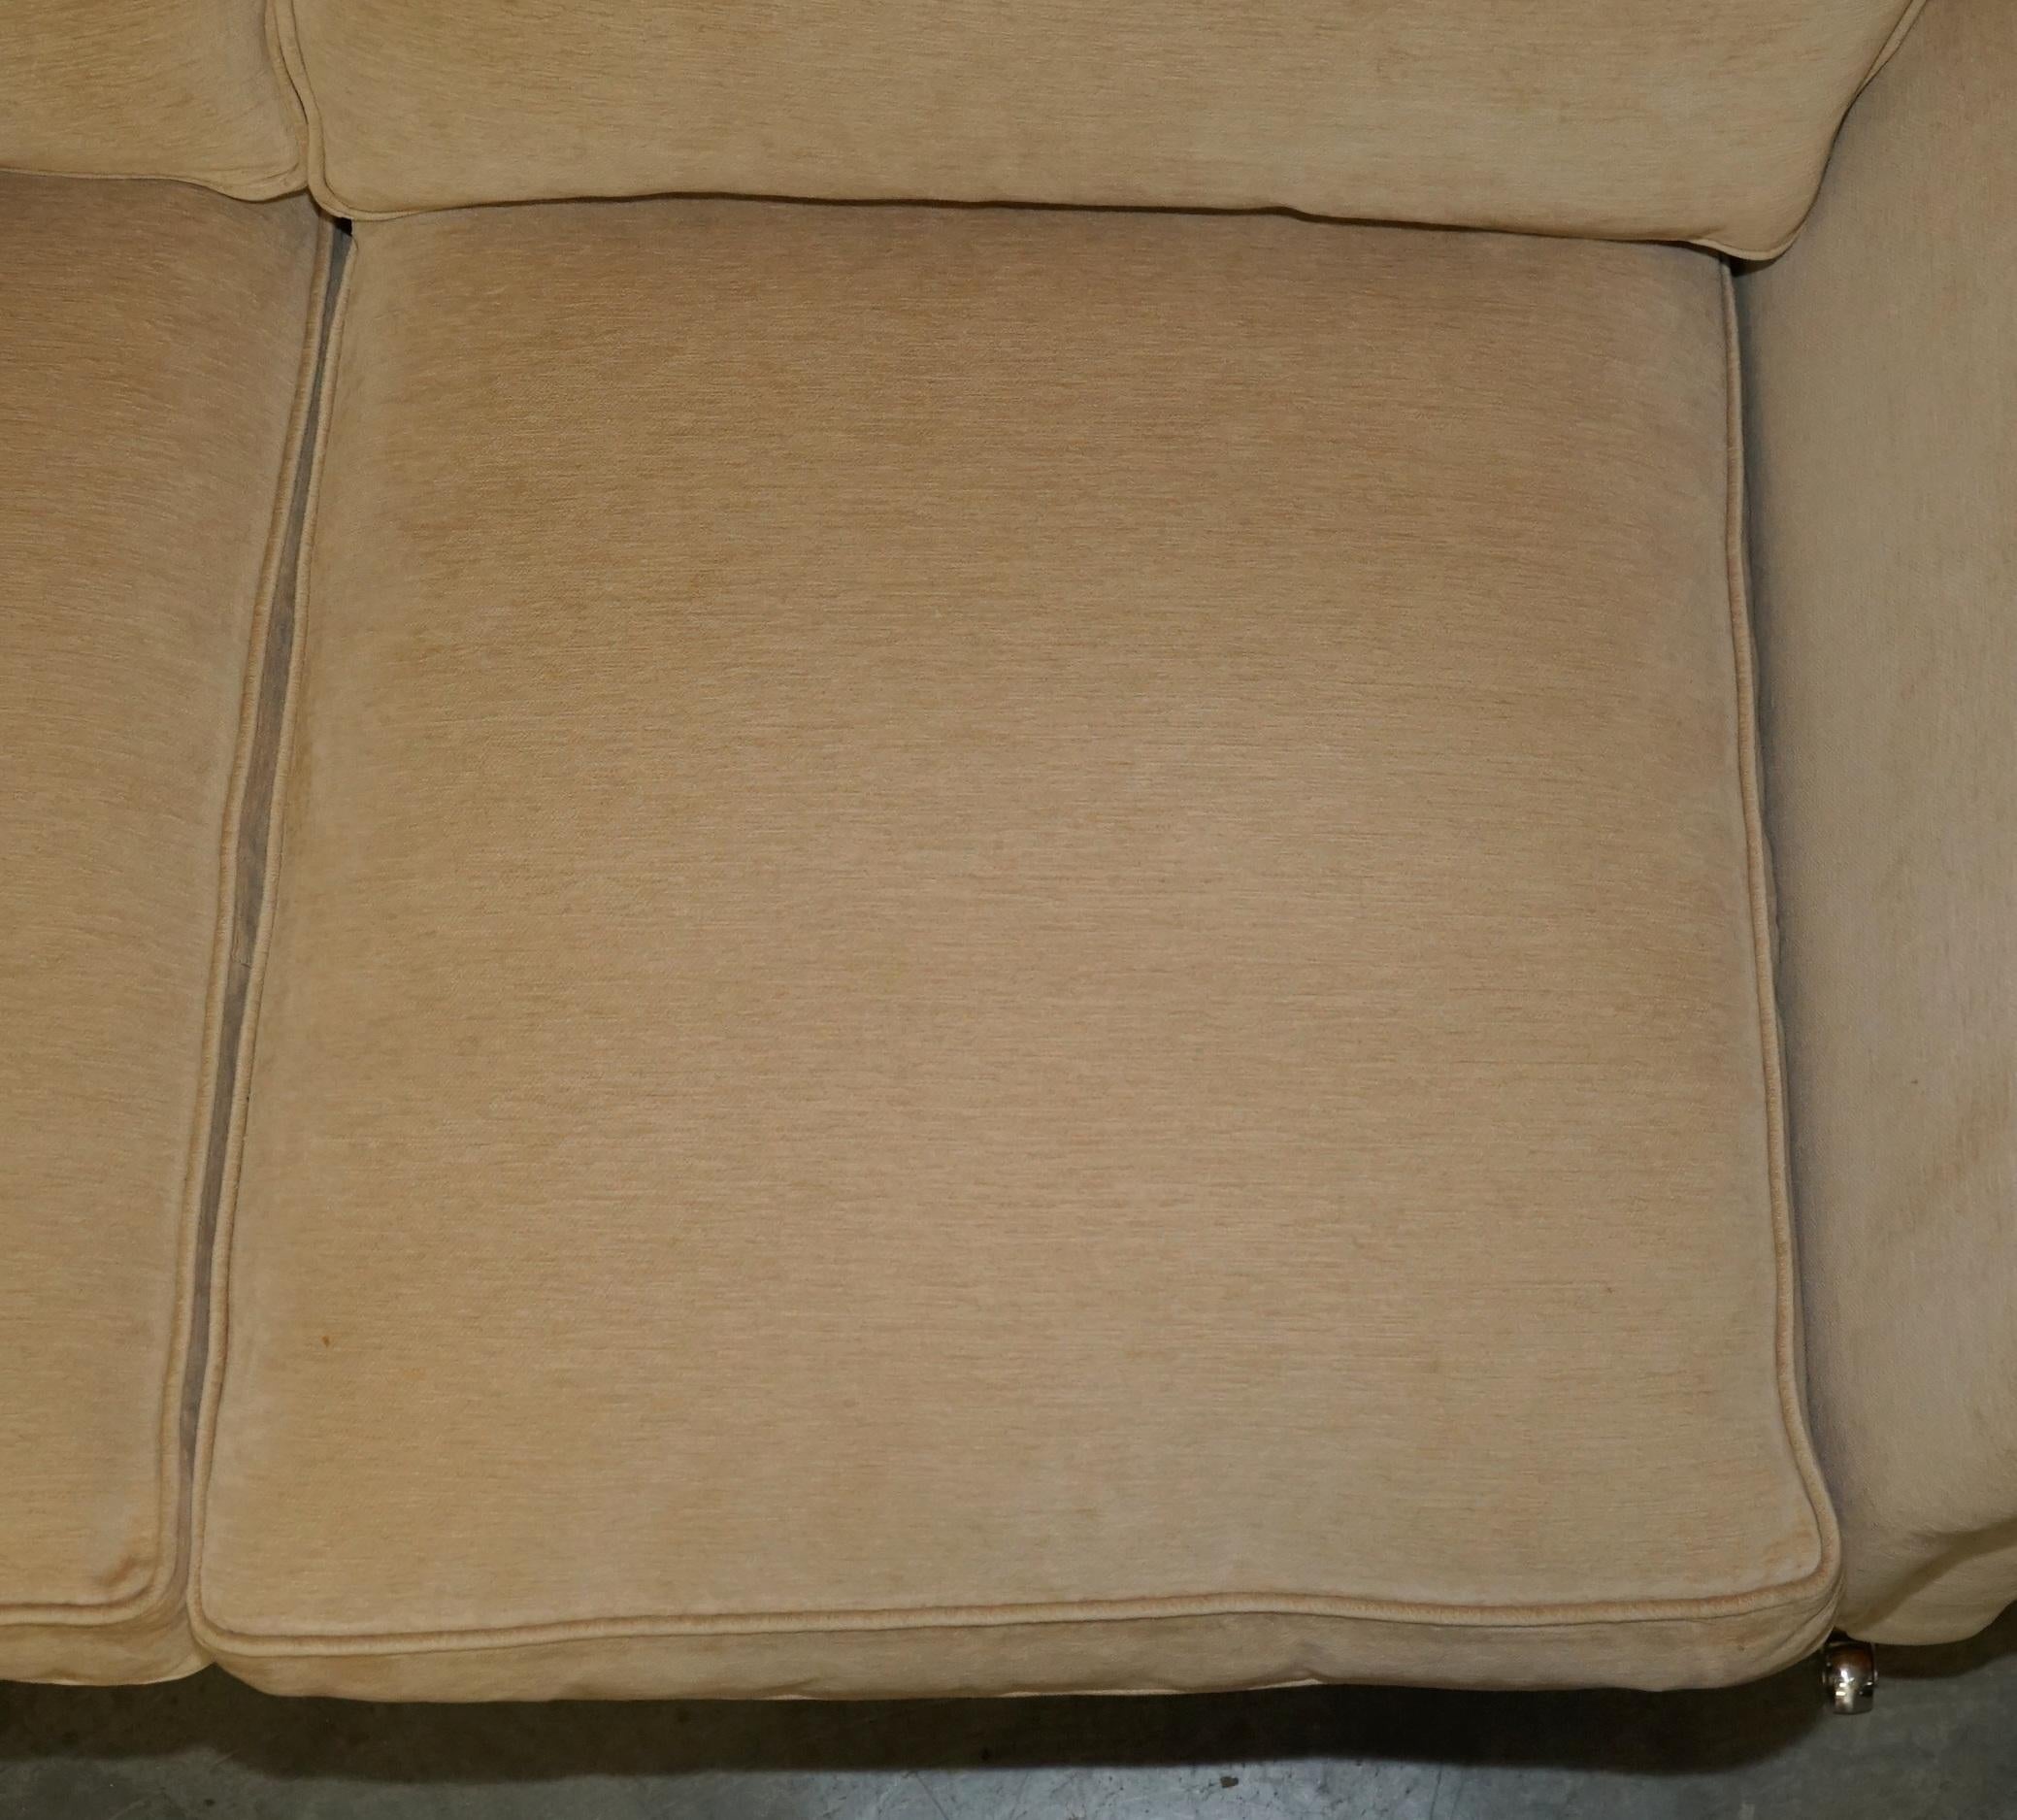 EXQUISITE VISCOUNT DAVID LINLEY TWO SEAT SOFA WiTH STAMPED CASTORS For Sale 6